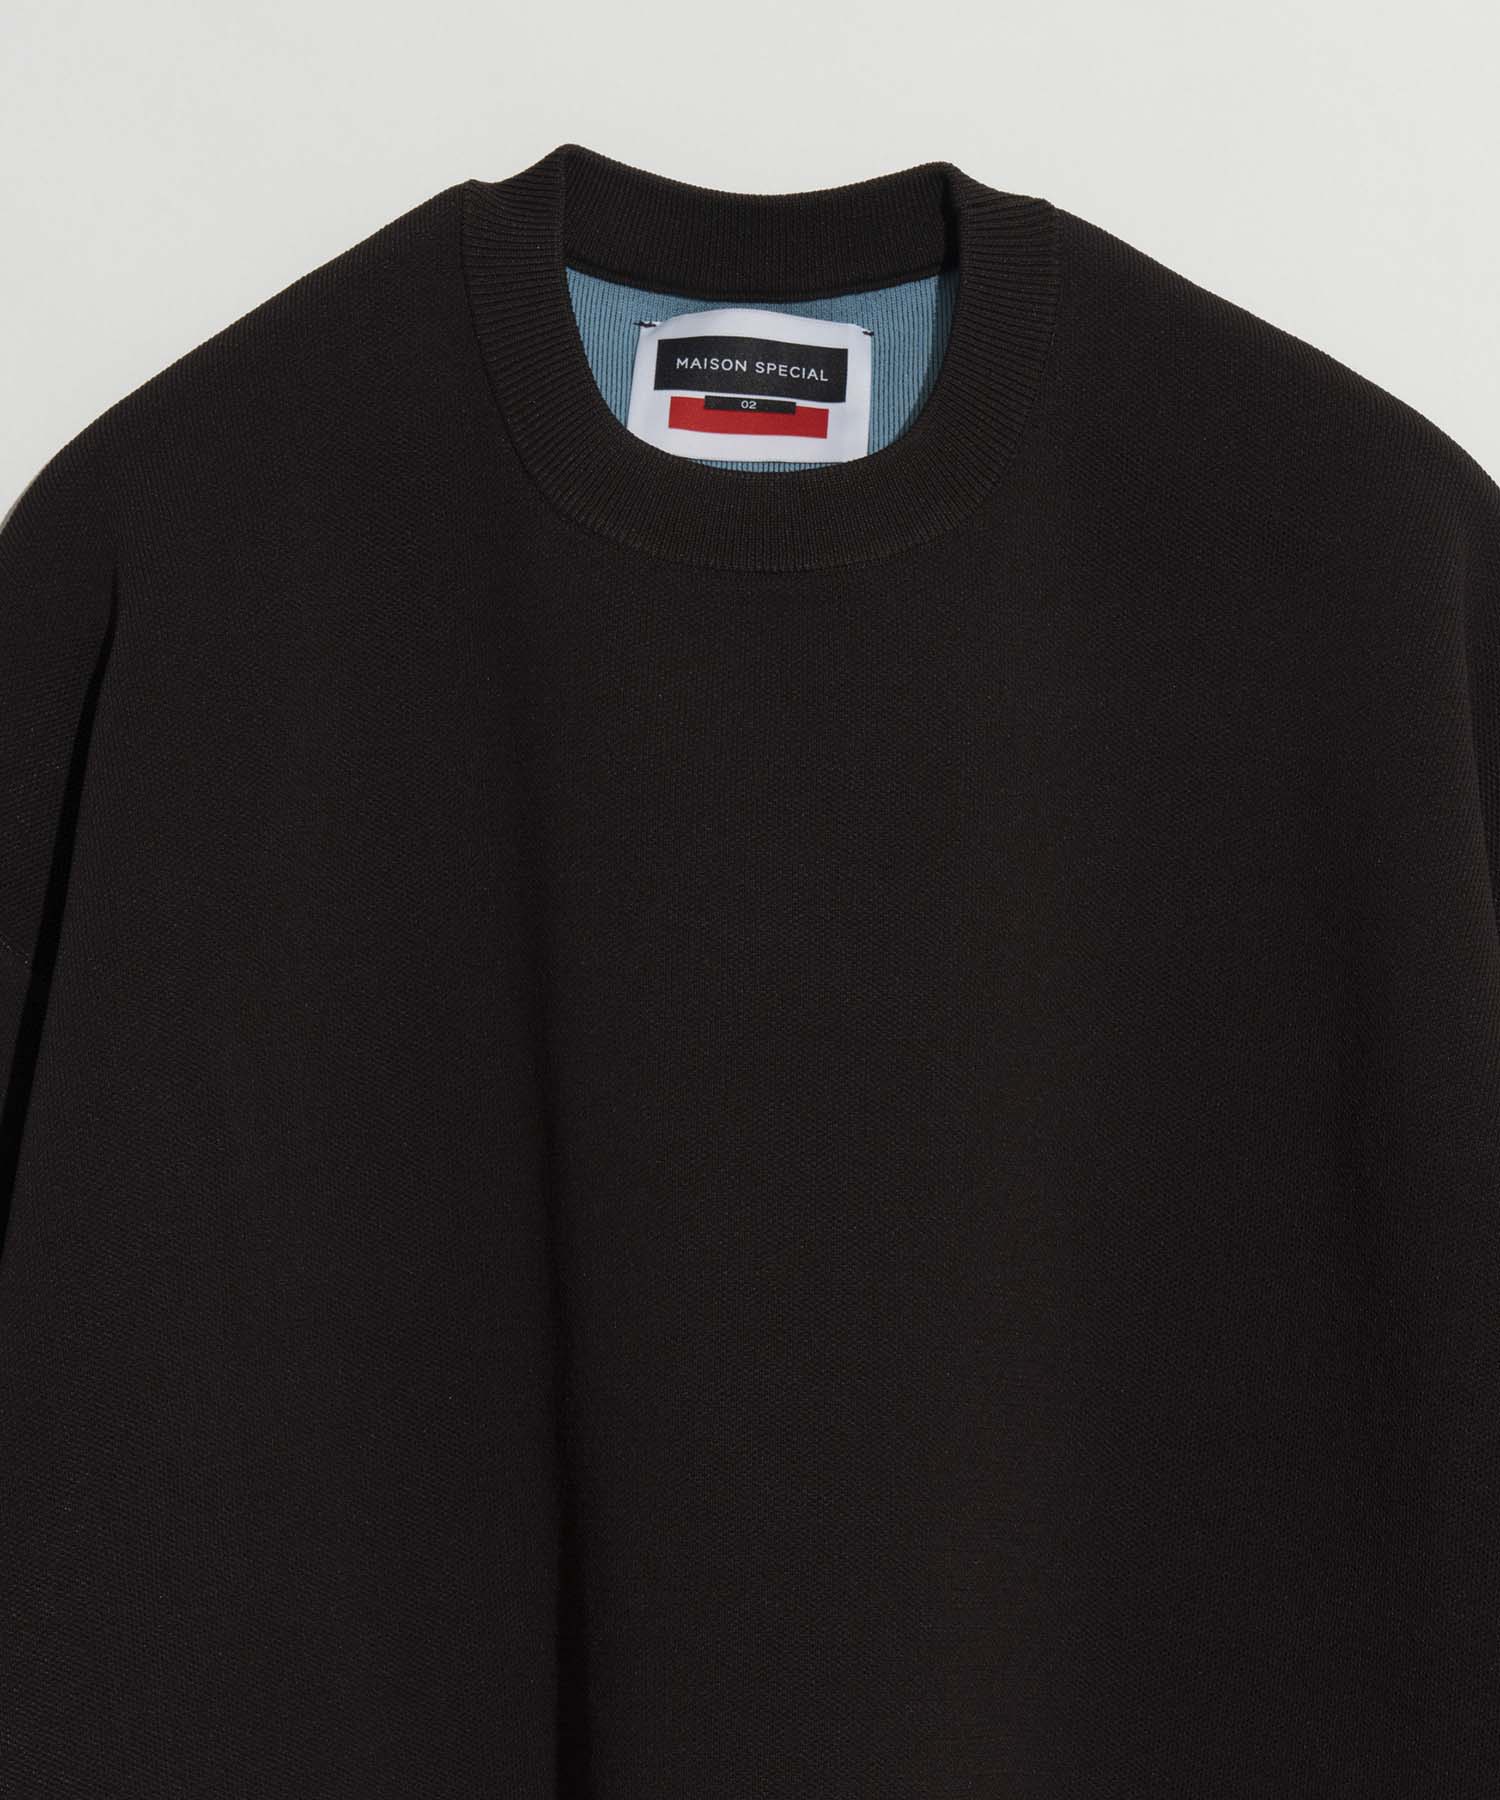 [SALE] DOUBLE-FACE KNIT PRIME-OVER REVERSIBLE CREW NECK PULLOVER